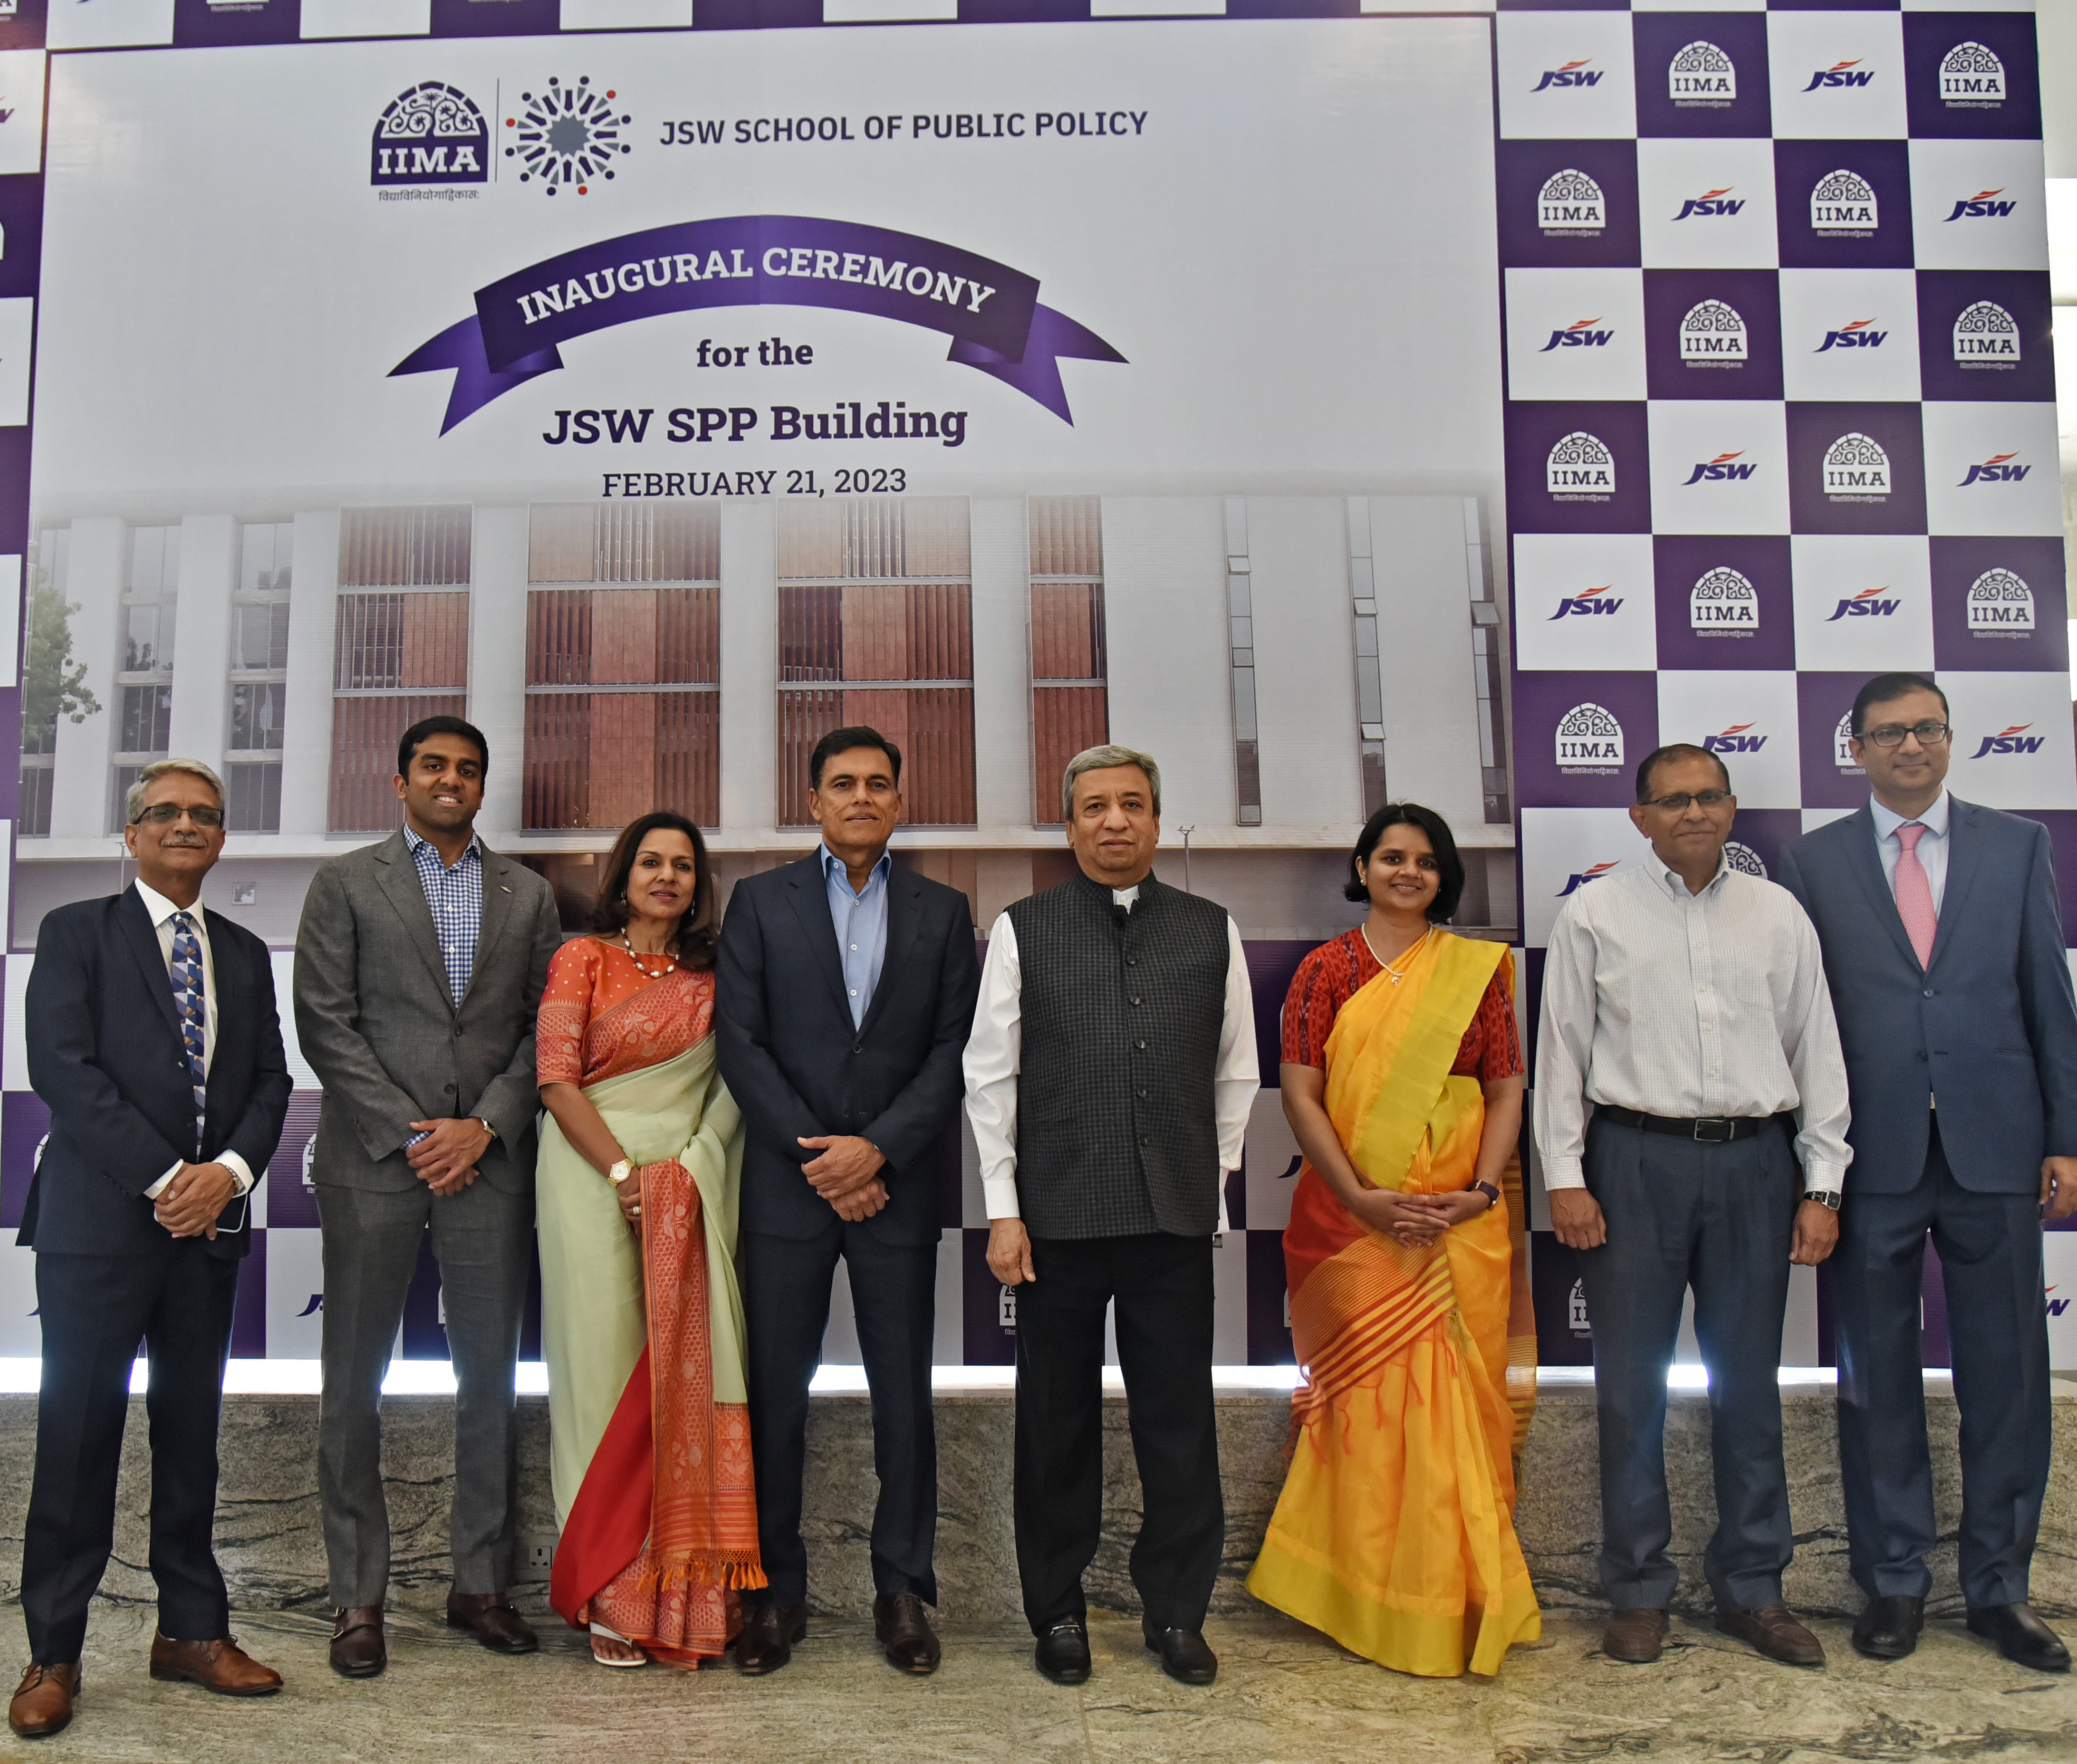 JSW School of Public Policy inaugurated at IIMA campus